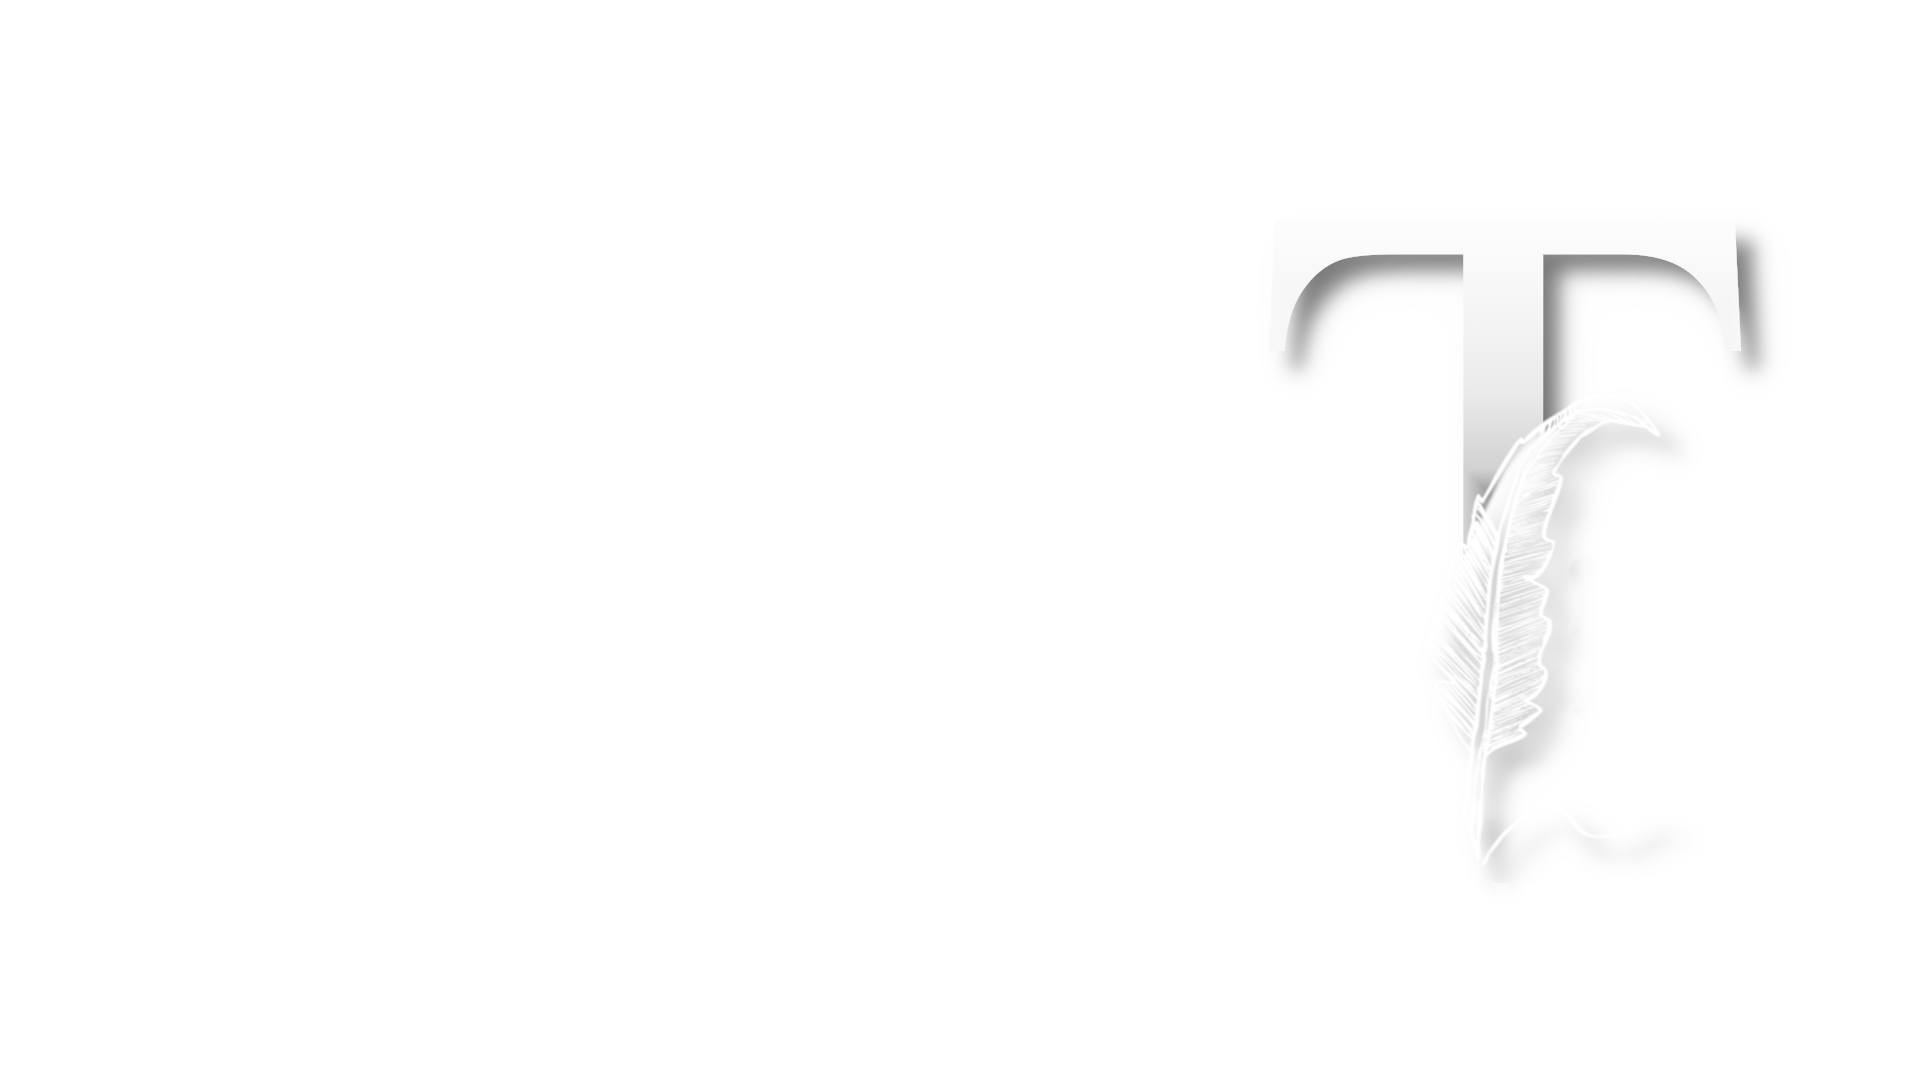 Truth and Fiction